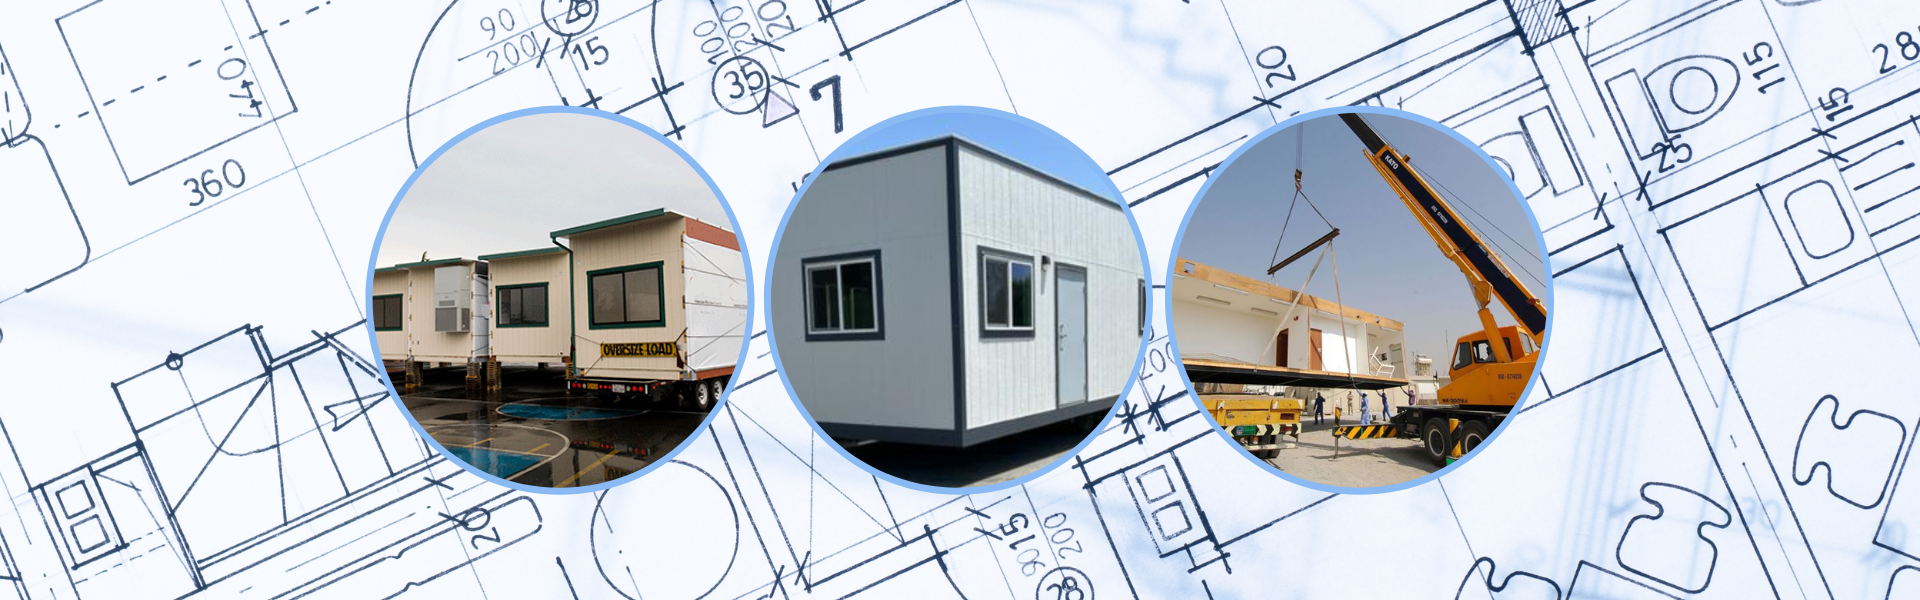 Modular buildings are a smart choice for space.